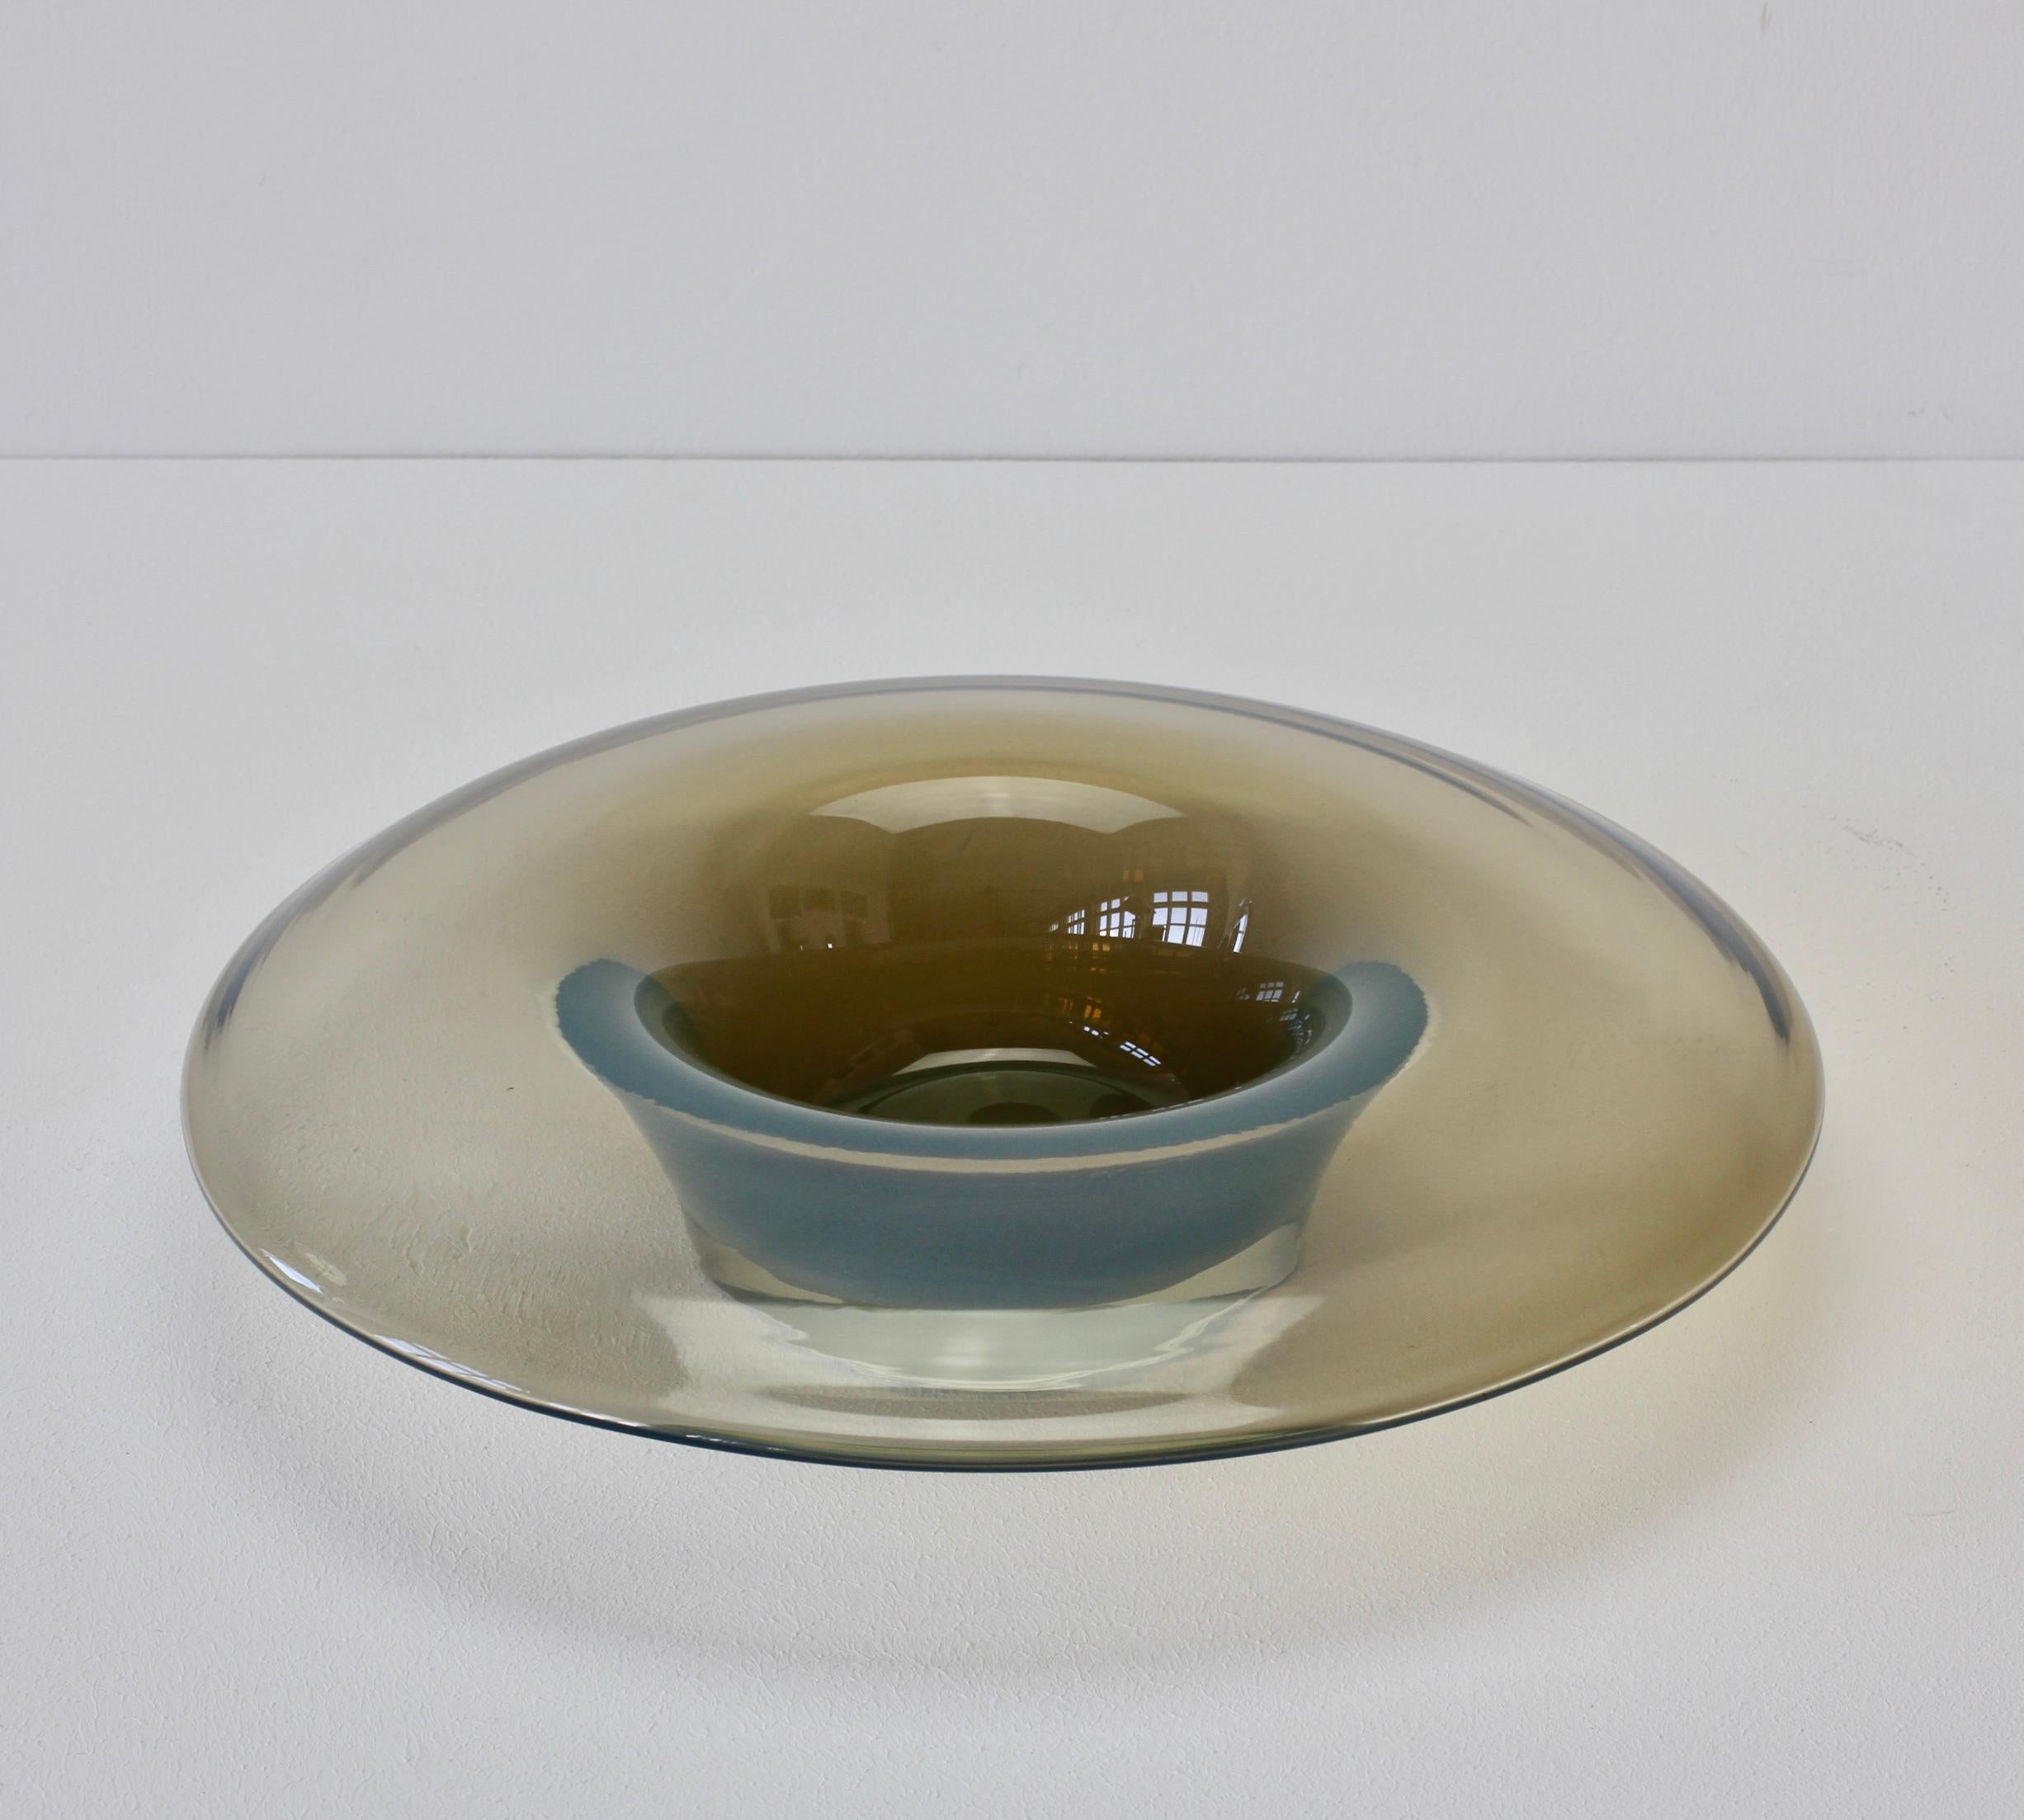 Italian Murano glass 'Opalino' serving or dipping bowl by Antonio da Ros for Cenedese, Italy, circa 1970-1990. Wonderful translucent color of smoked grey. Simplistic yet elegant form, almost futuristic. Very fun to dine with this rare piece of